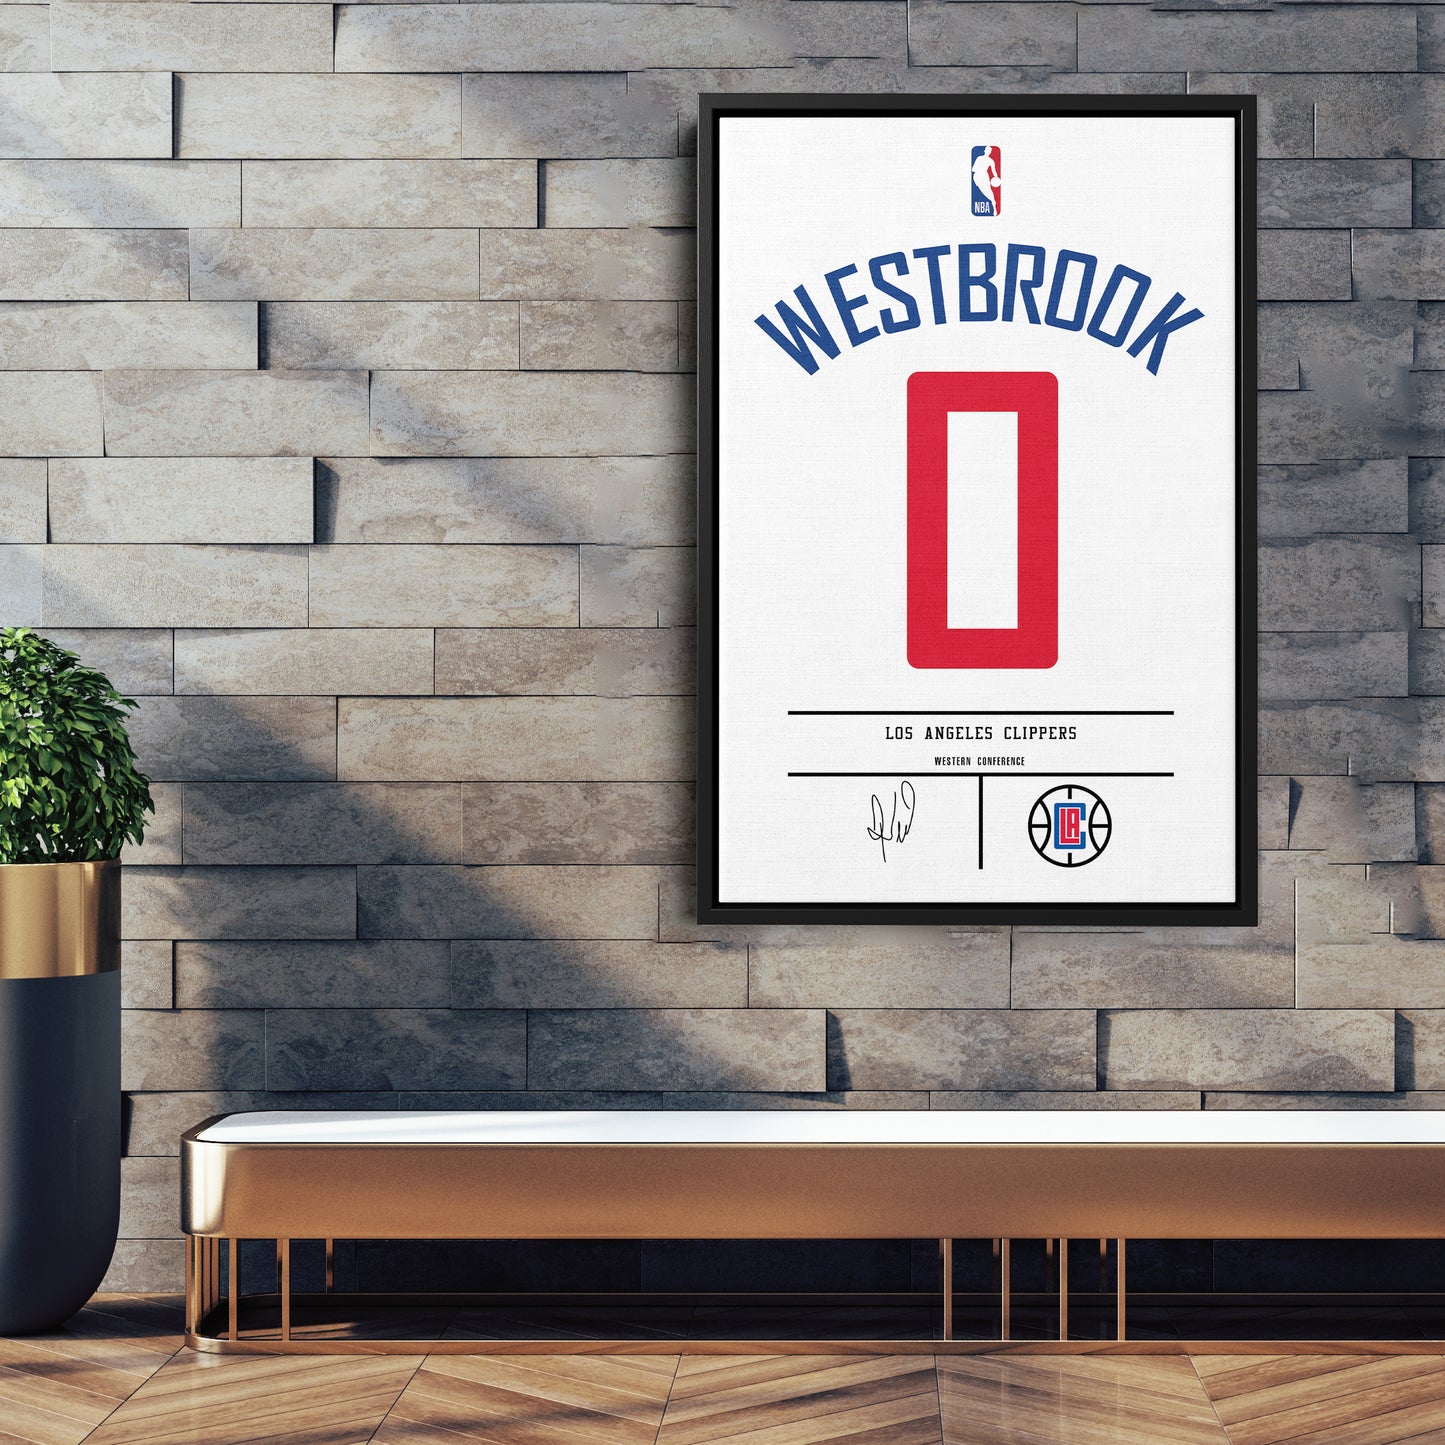 Russell Westbrook Clippers Jersey Art